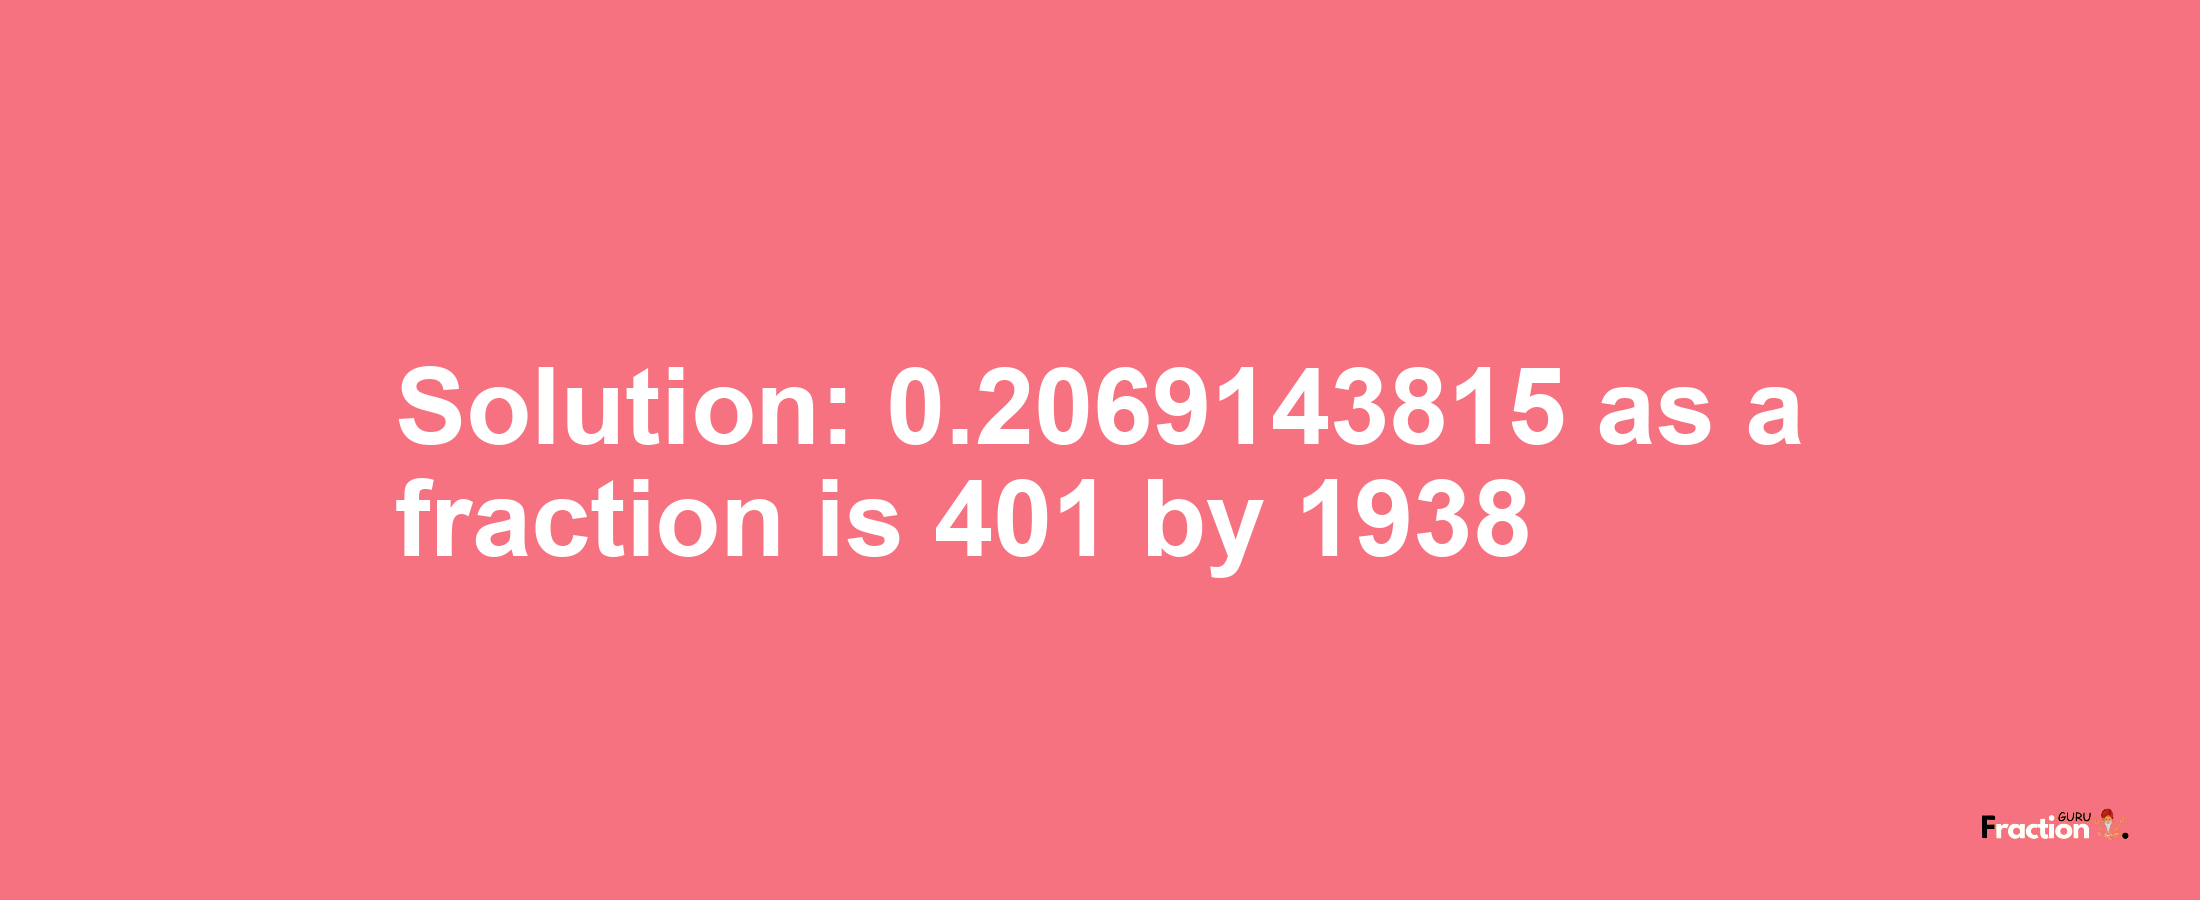 Solution:0.2069143815 as a fraction is 401/1938